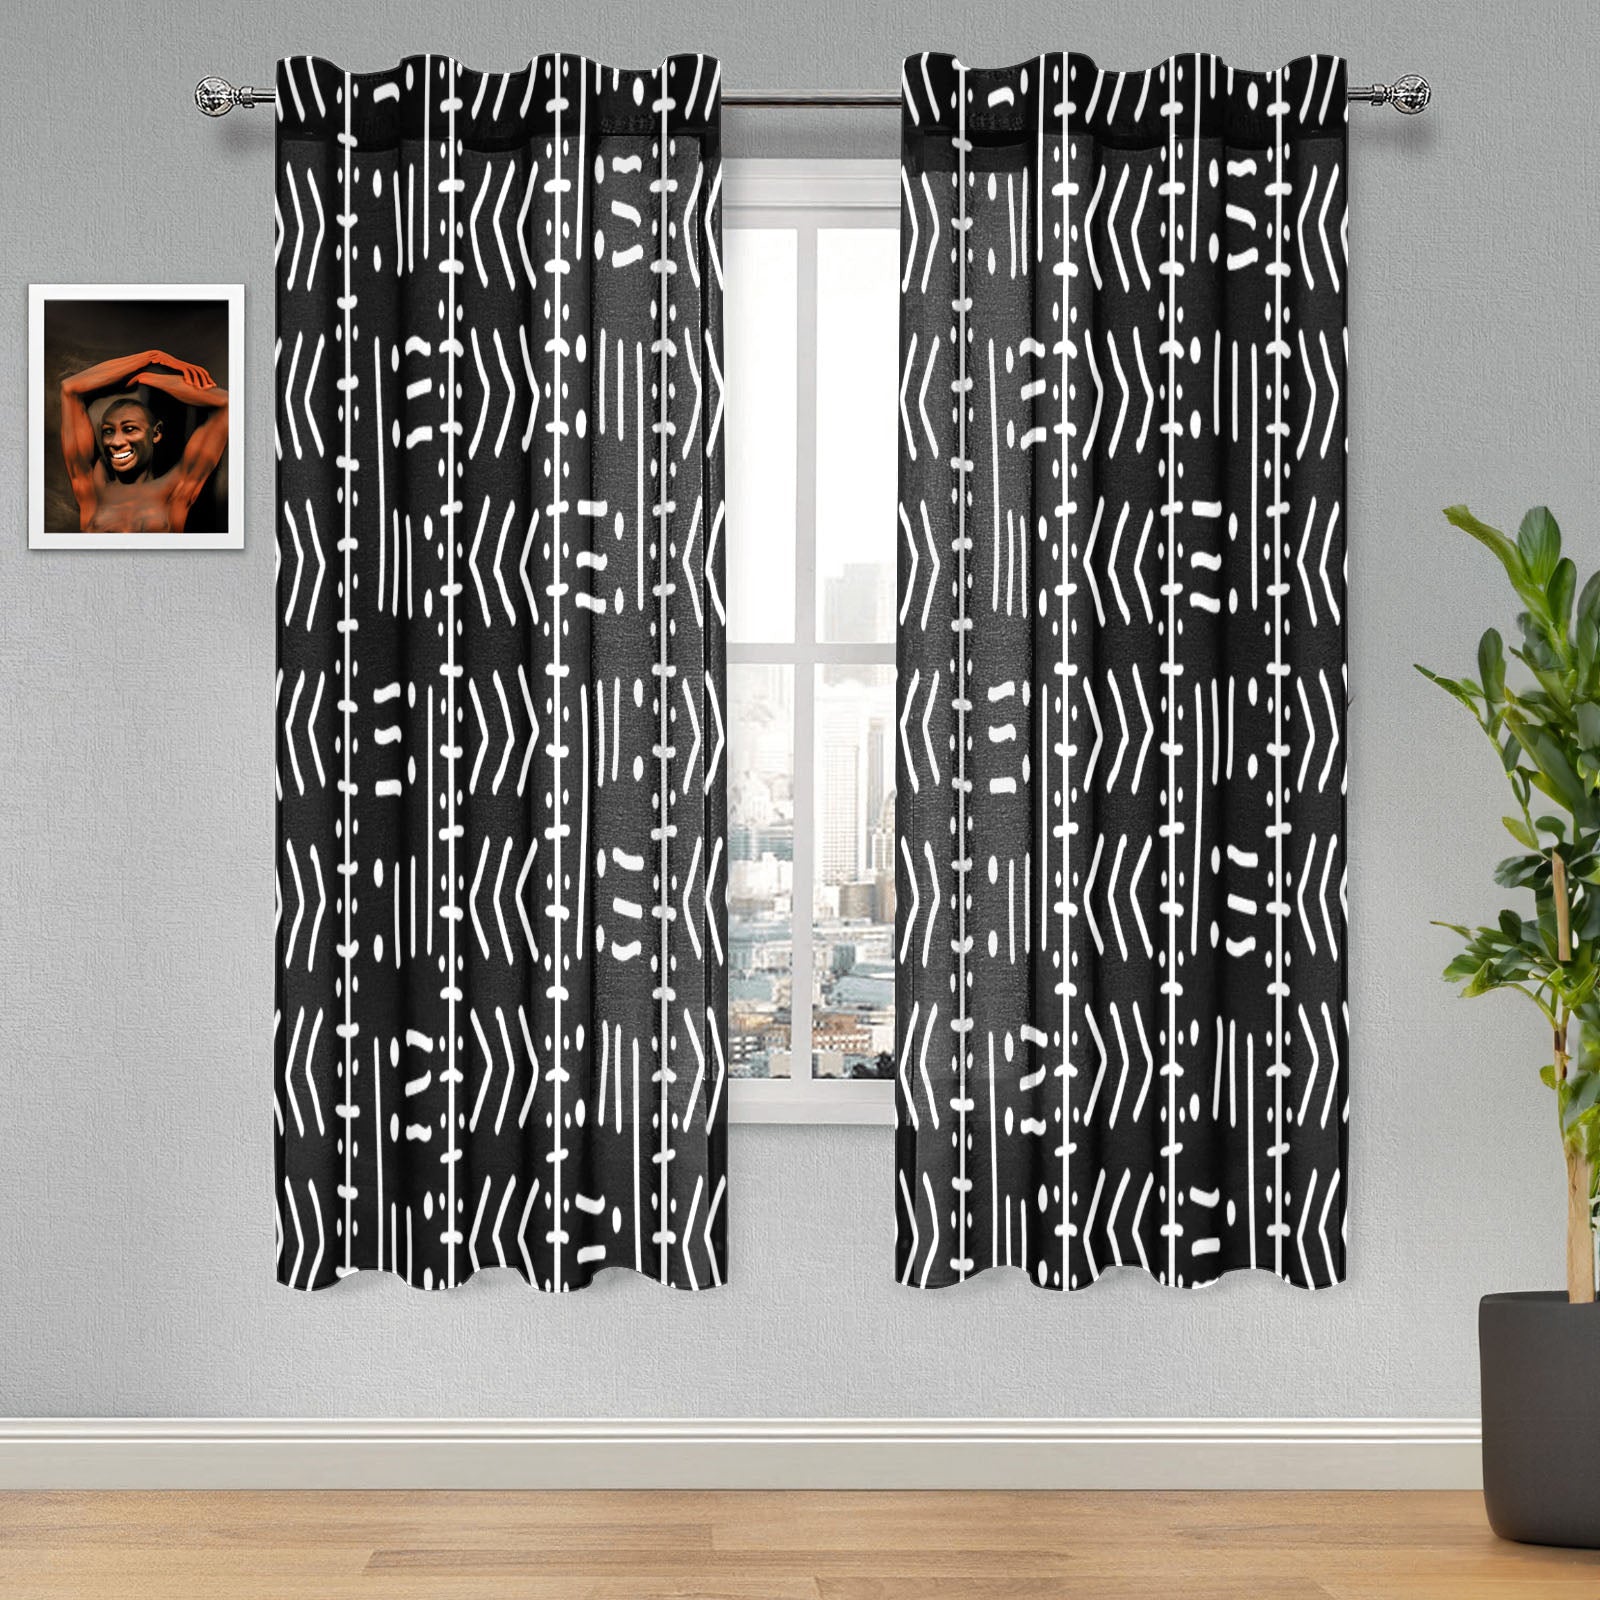 Black and White African Curtain Tribal Print (Two Piece)- Bynelo